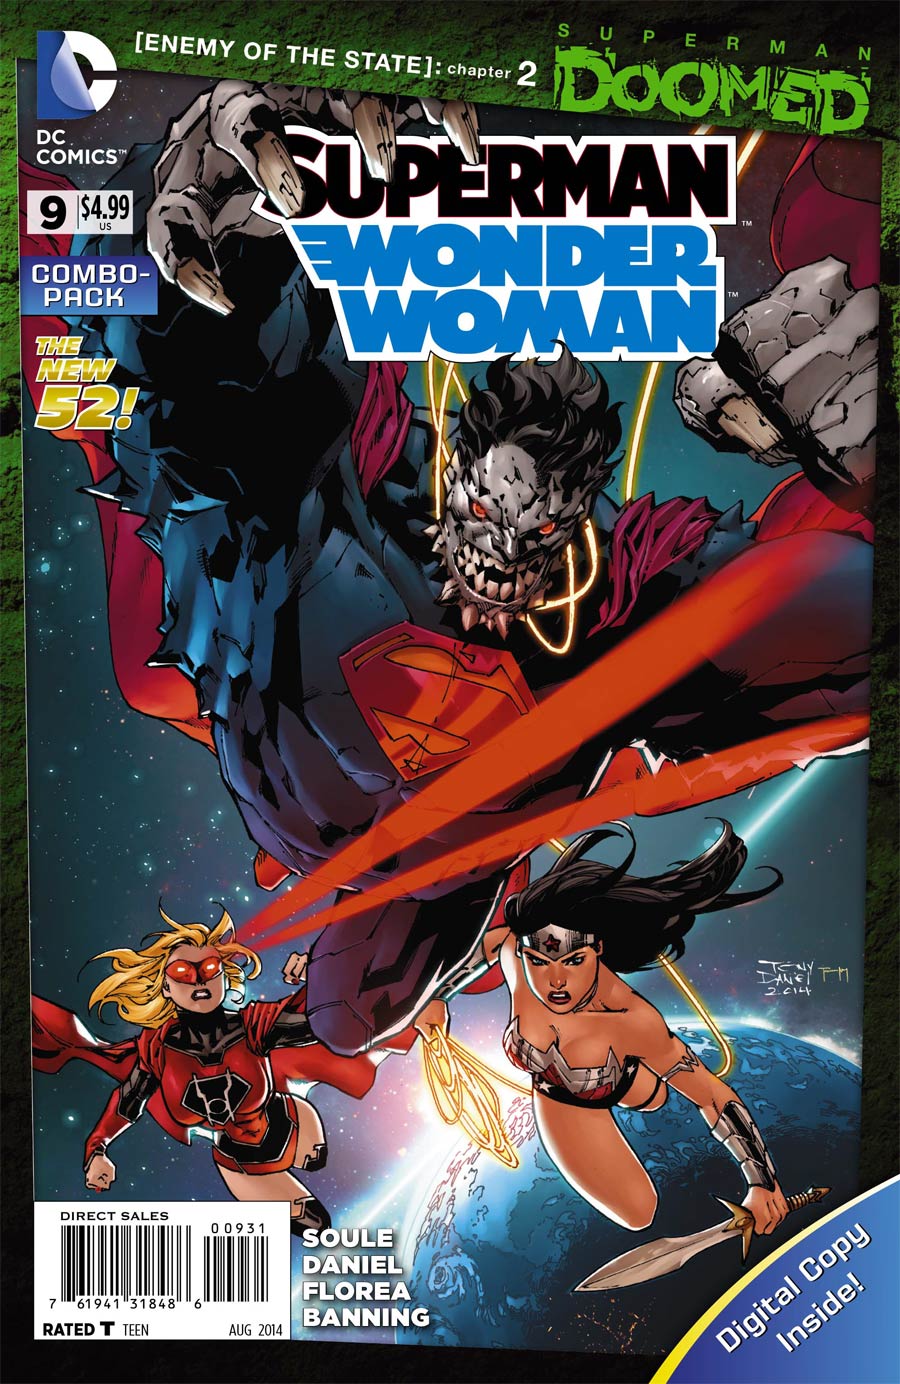 Superman Wonder Woman #9 Cover C Combo Pack With Polybag (Superman Doomed Tie-In)